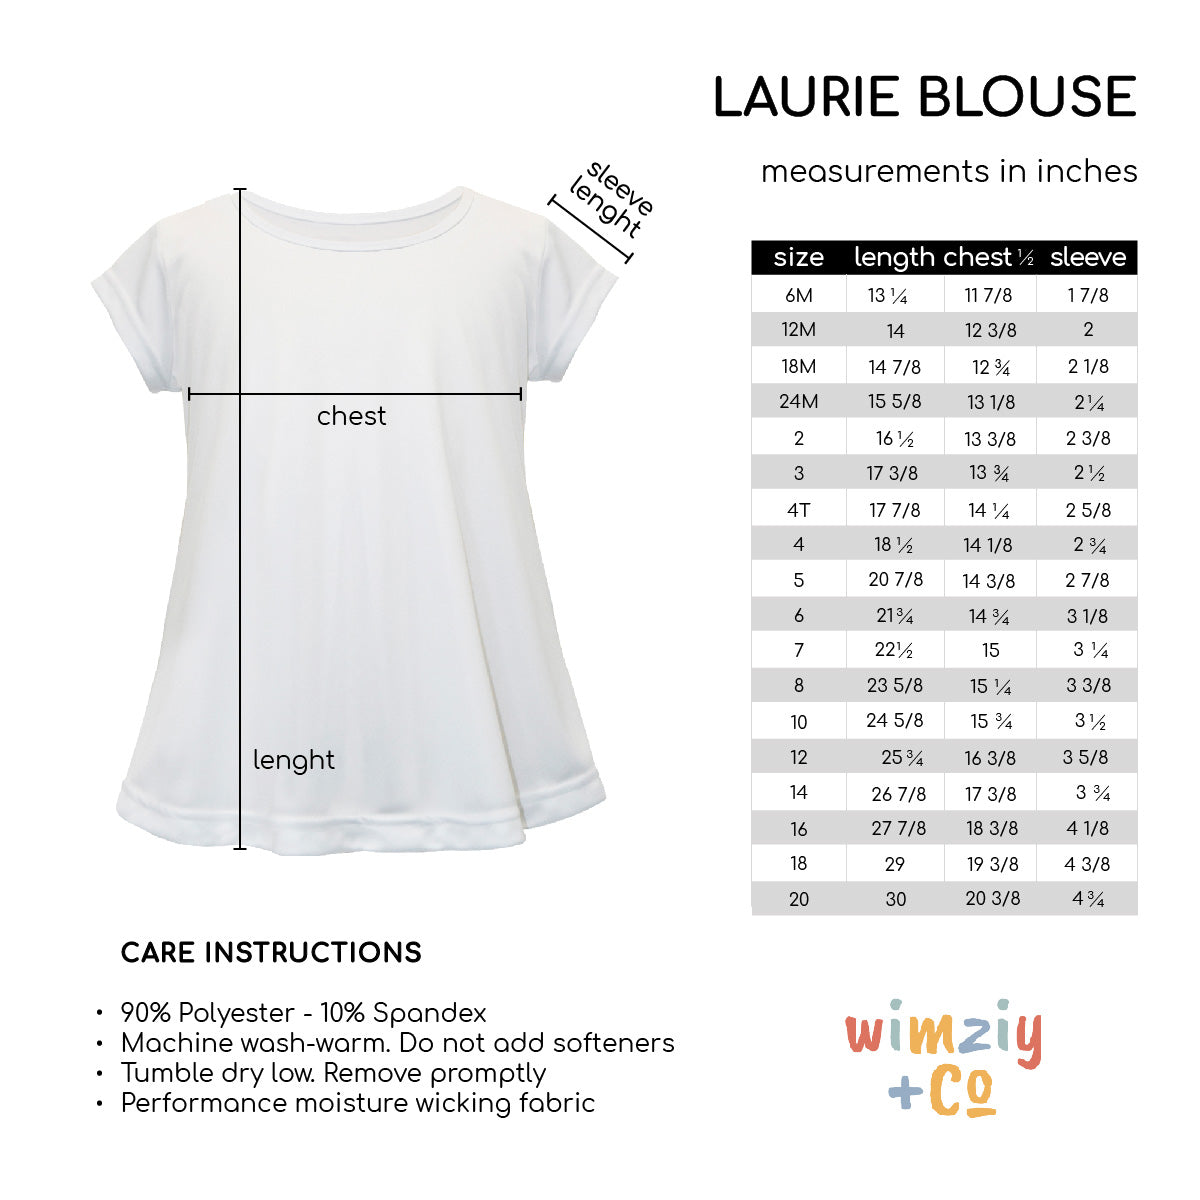 Gymnast White Short Sleeve Laurie Top - Wimziy&Co.